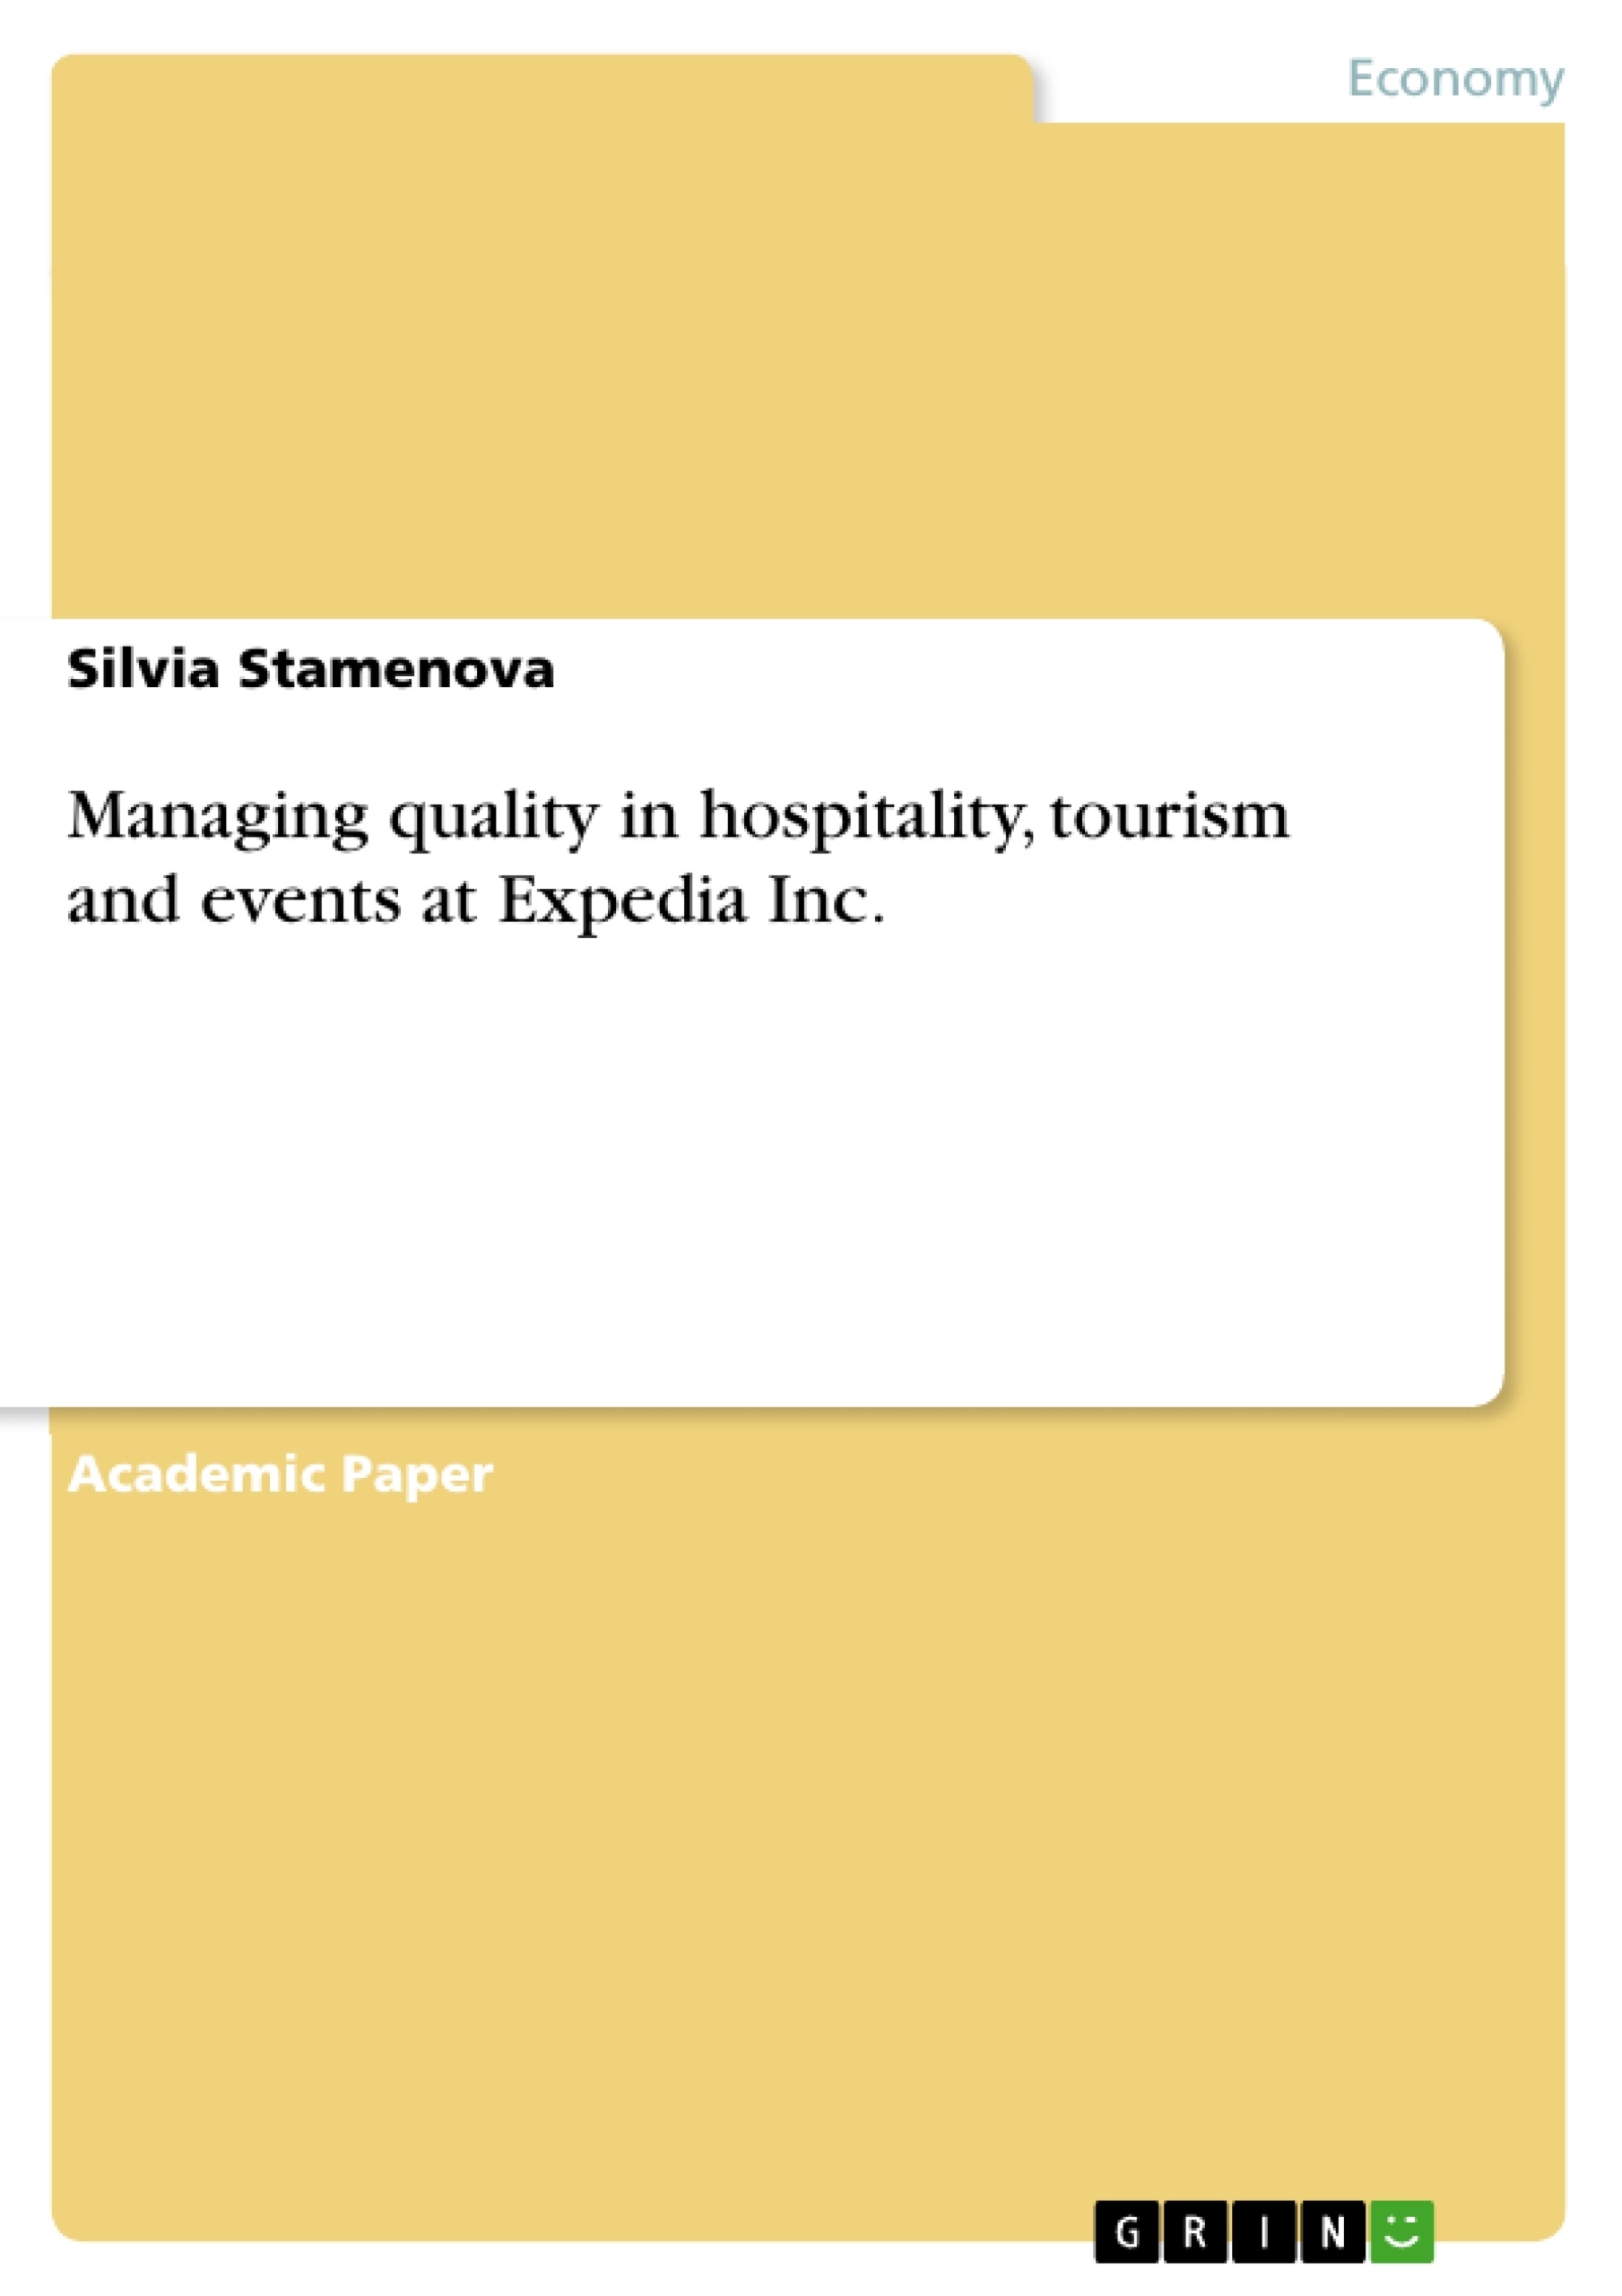 Title: Managing quality in hospitality, tourism and events at Expedia Inc.